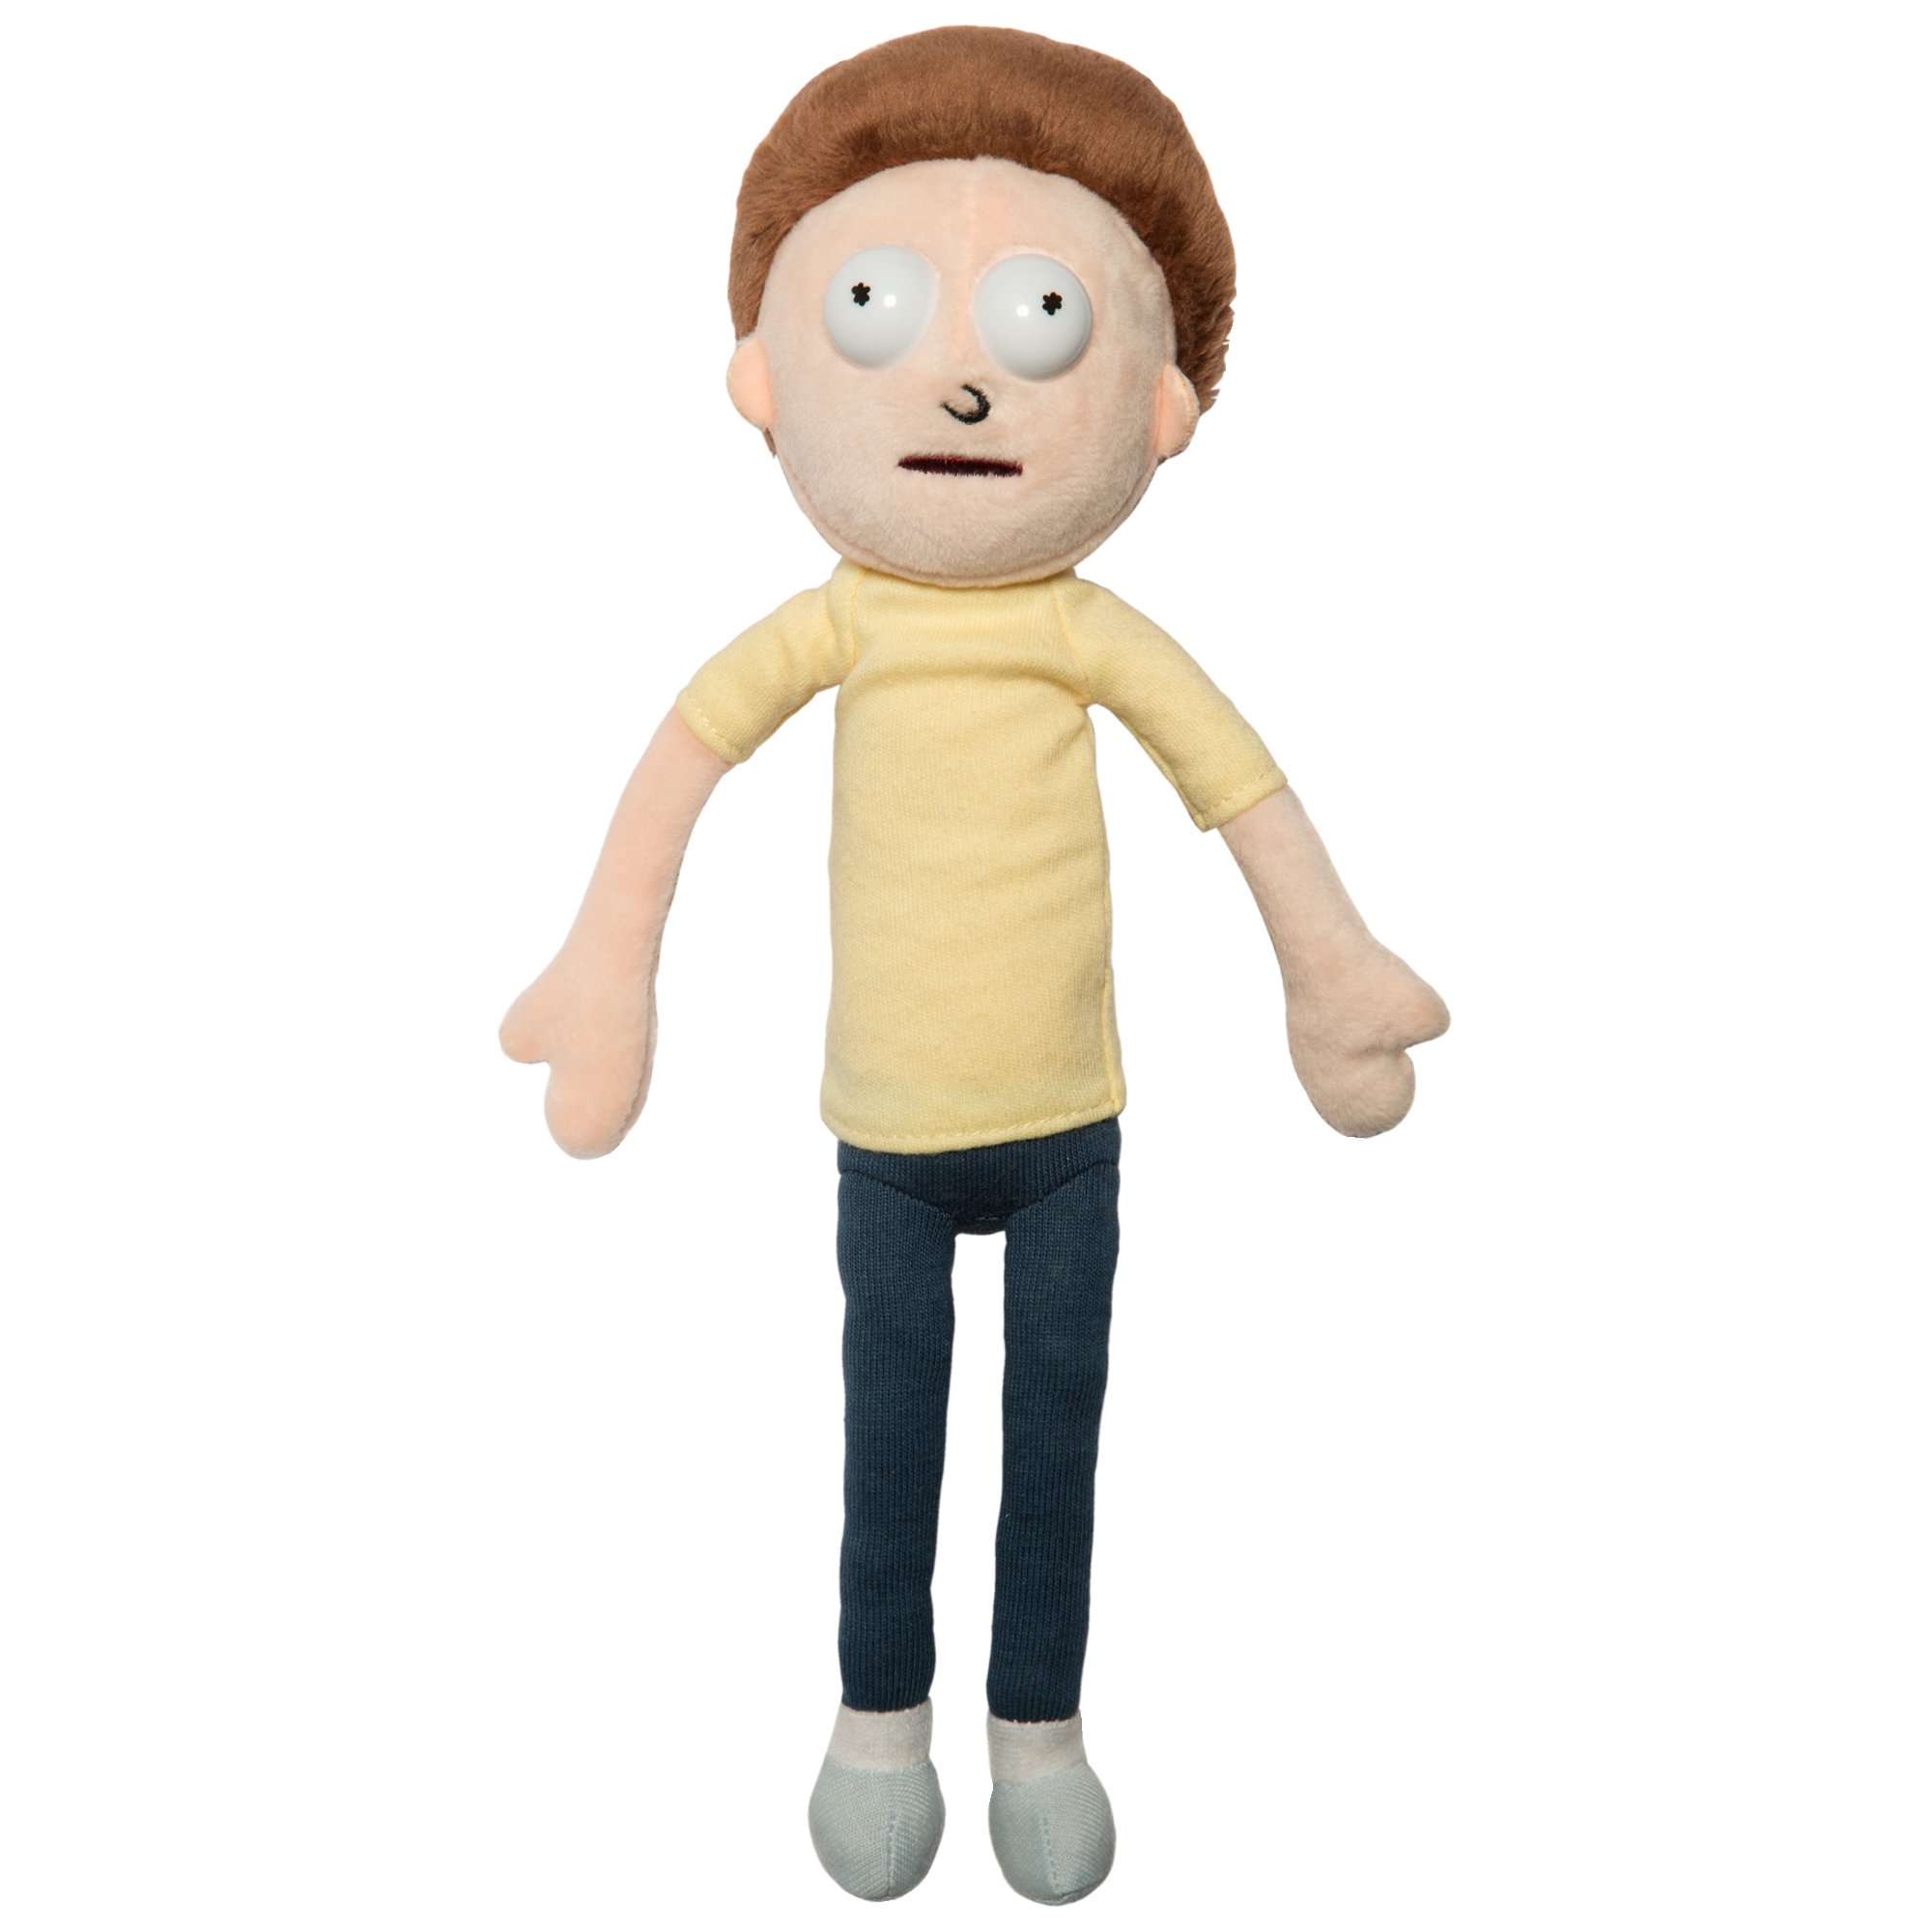 Ricky and Morty Plush